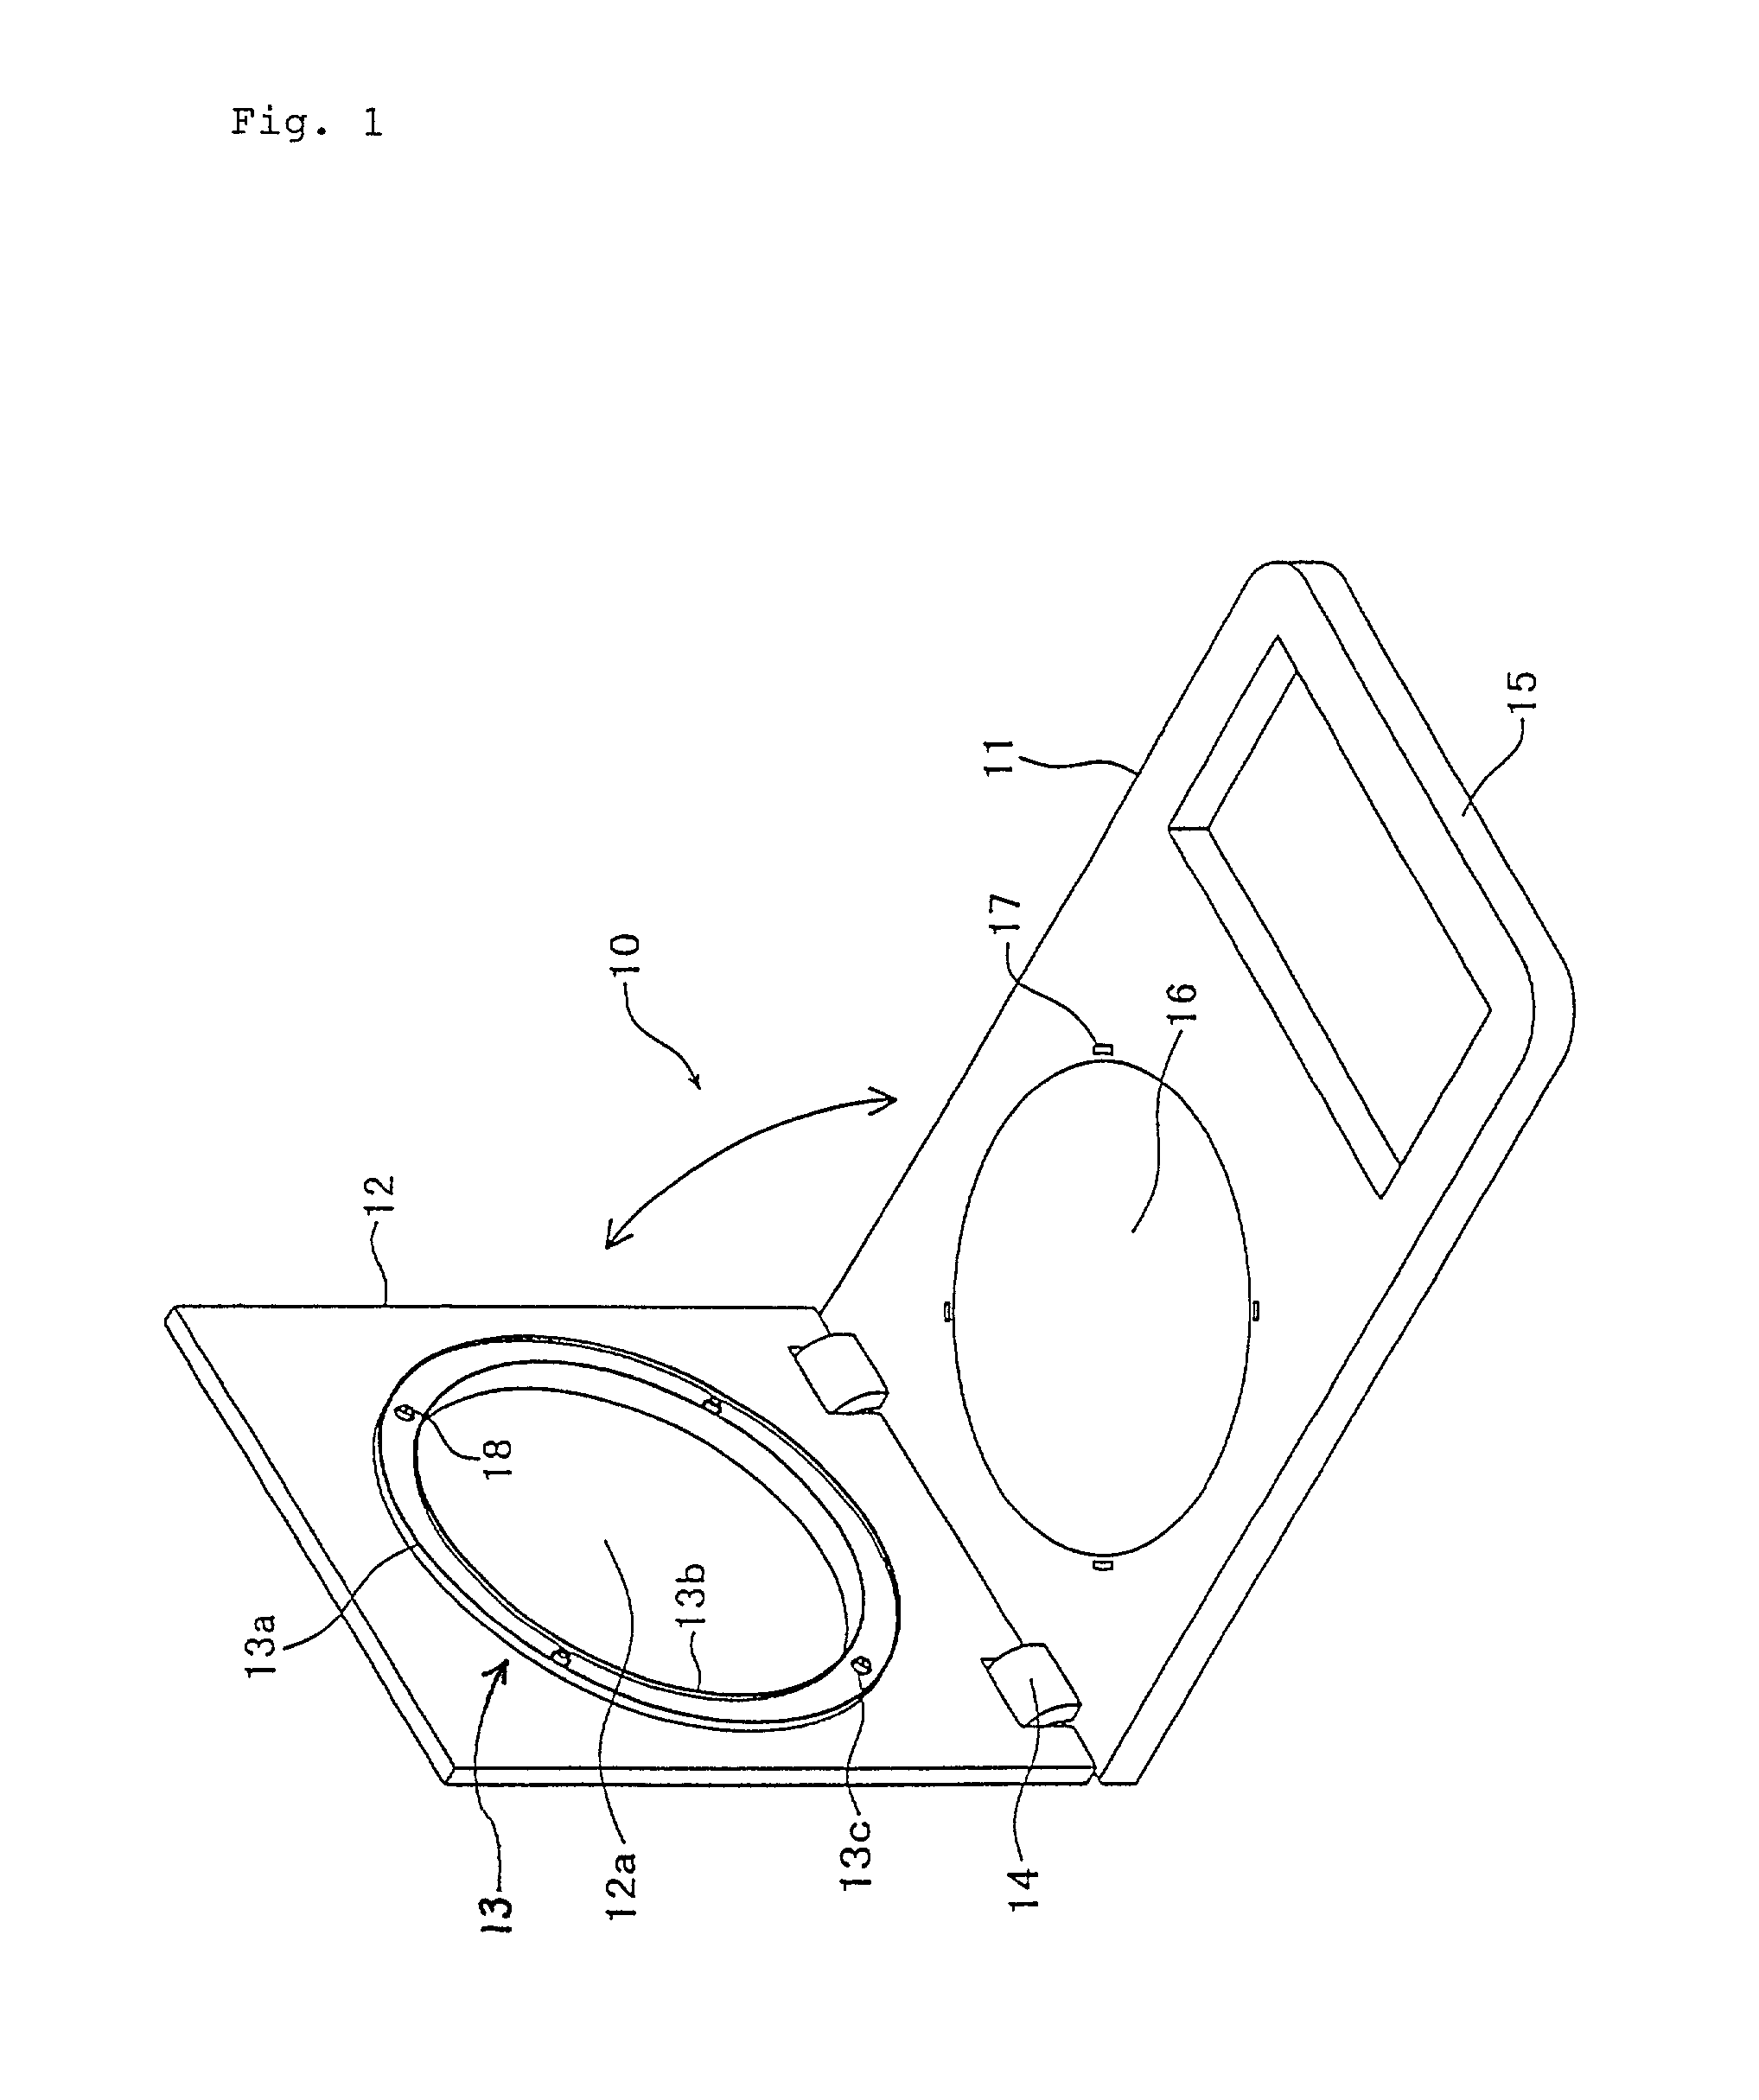 Semiconductor wafer holder and electroplating system for plating a semiconductor wafer